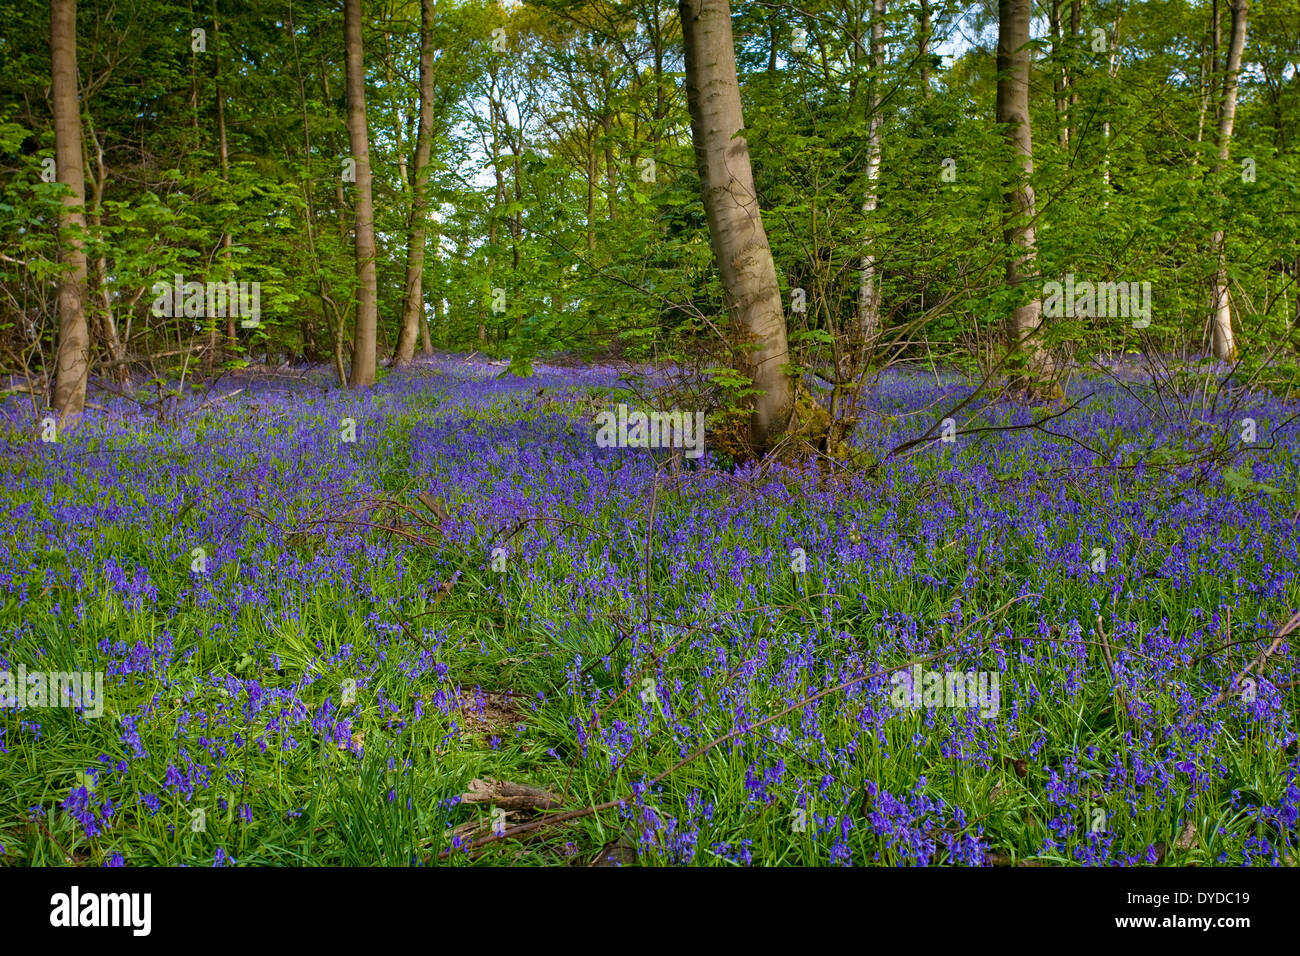 Bluebells carpet the ground in woodland. Stock Photo